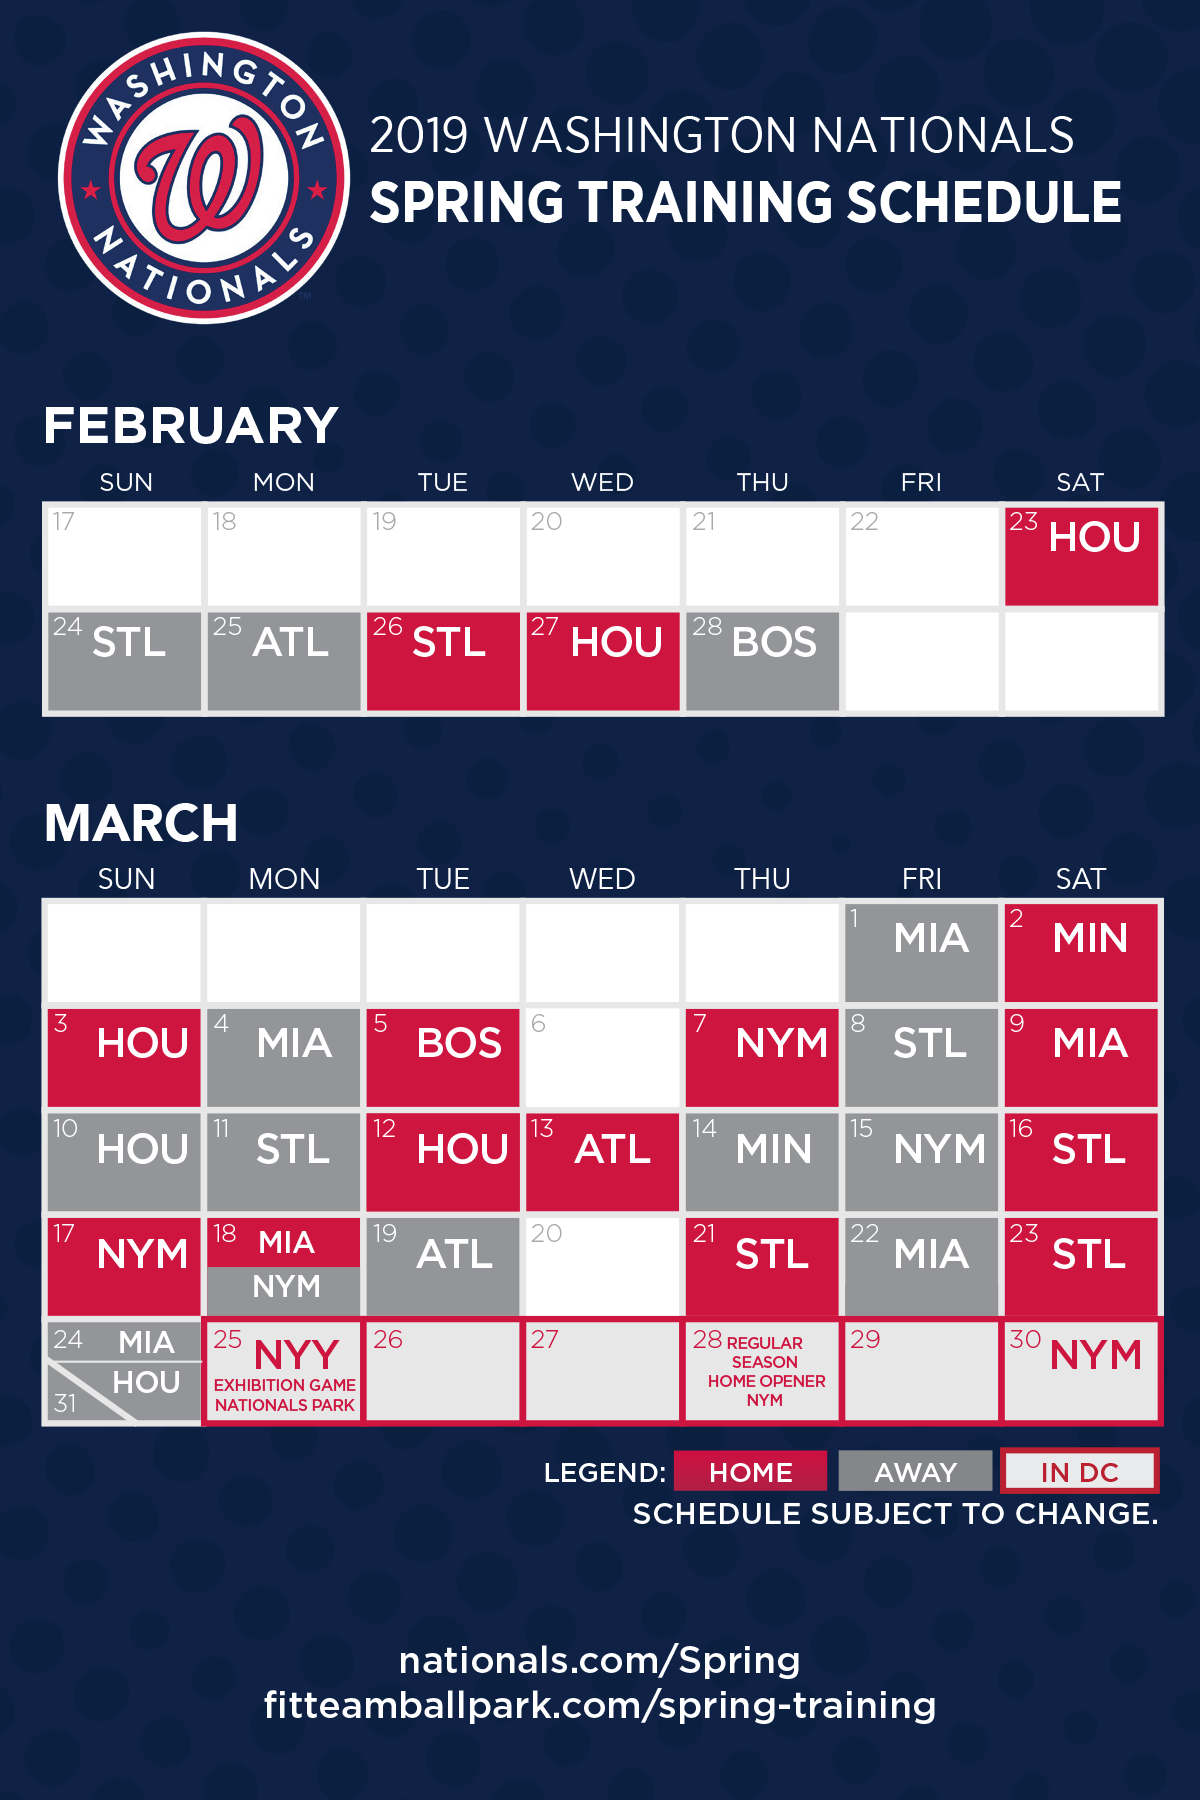 Nationals announce 2019 Spring Training Schedule – Curly W Live